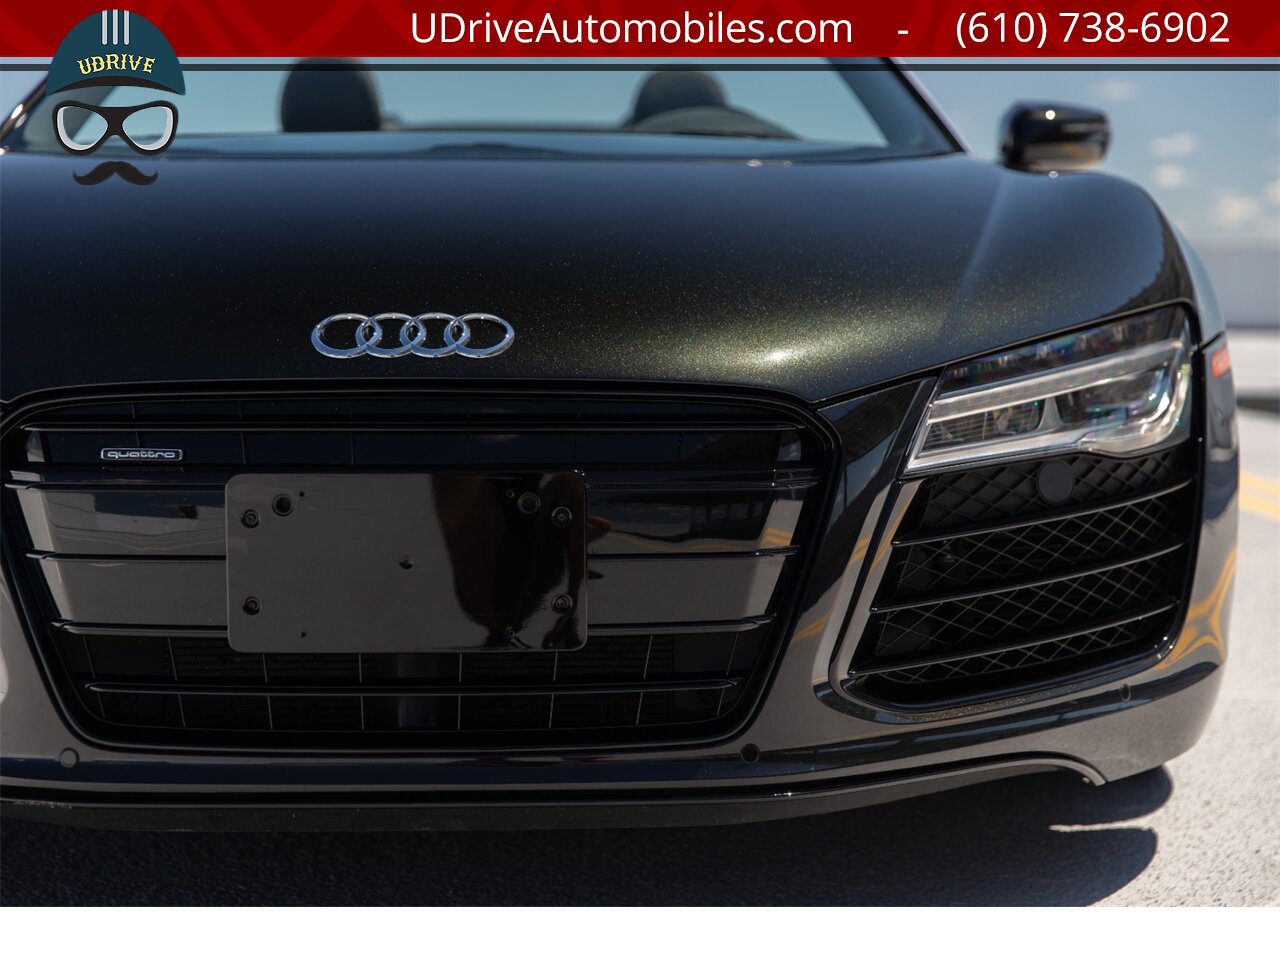 2014 Audi R8 5.2 V10 Quattro Spyder 6 Speed Manual 2k Miles  Extremely RARE 1 of 1 Color Combo - Photo 11 - West Chester, PA 19382